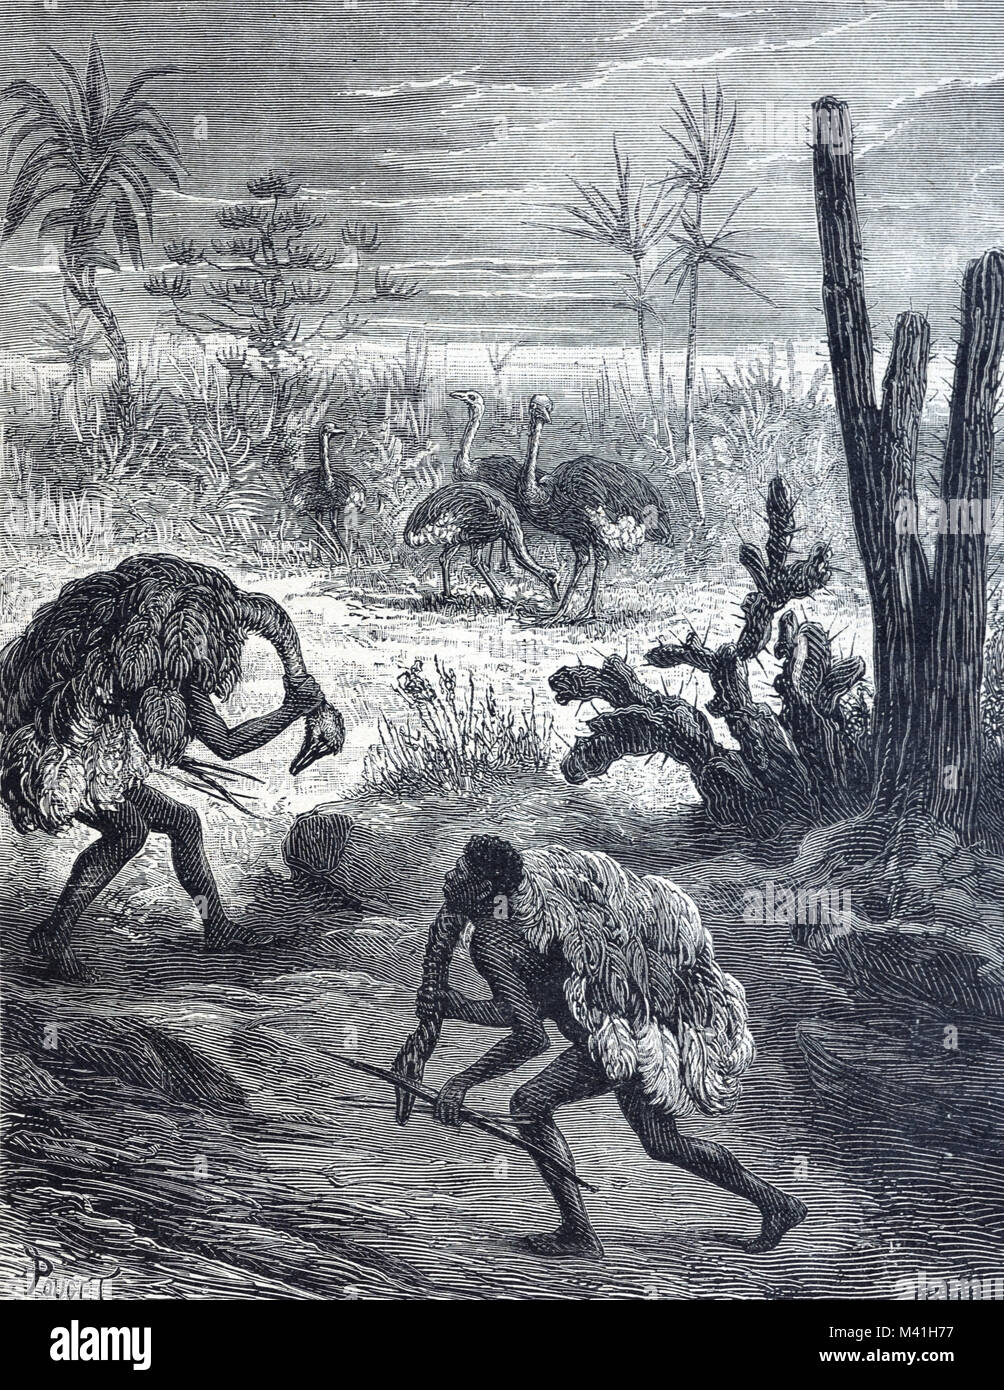 African Men Hunters Dressed in Ostrich Costumes Sneaking Up on, or Hunting Ostriches (Engraving 1879) Stock Photo